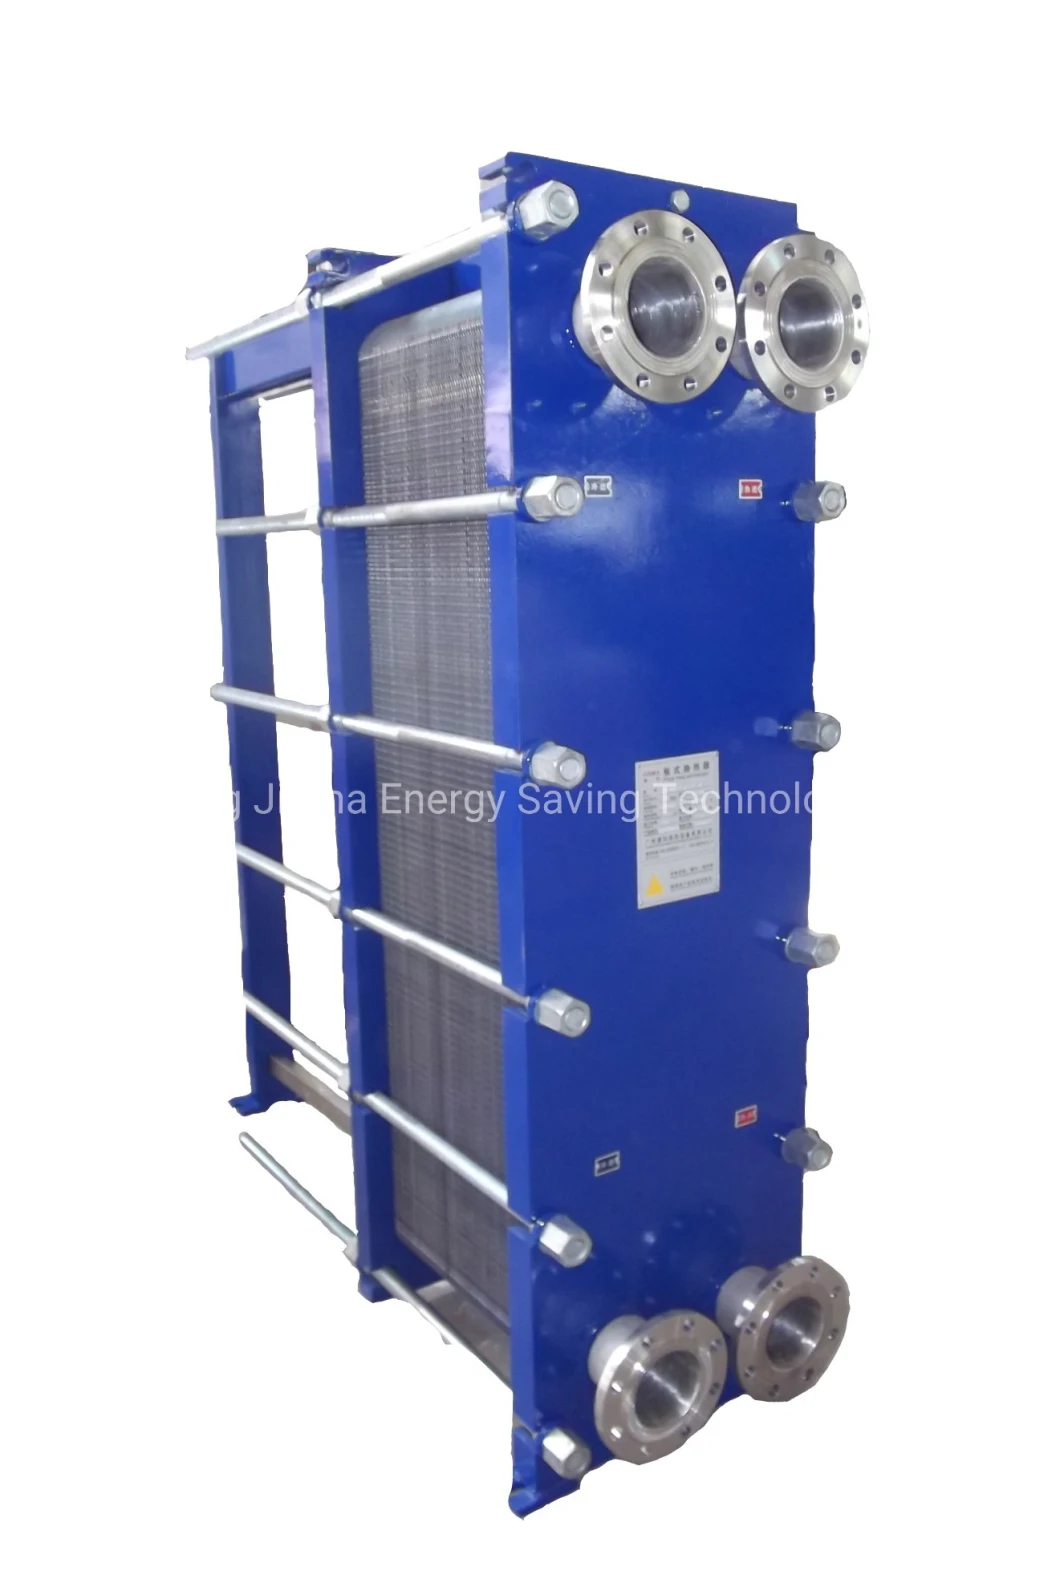 Titanium Plate High Quality Phe Plate Heat Exchanger Realiable Supplier